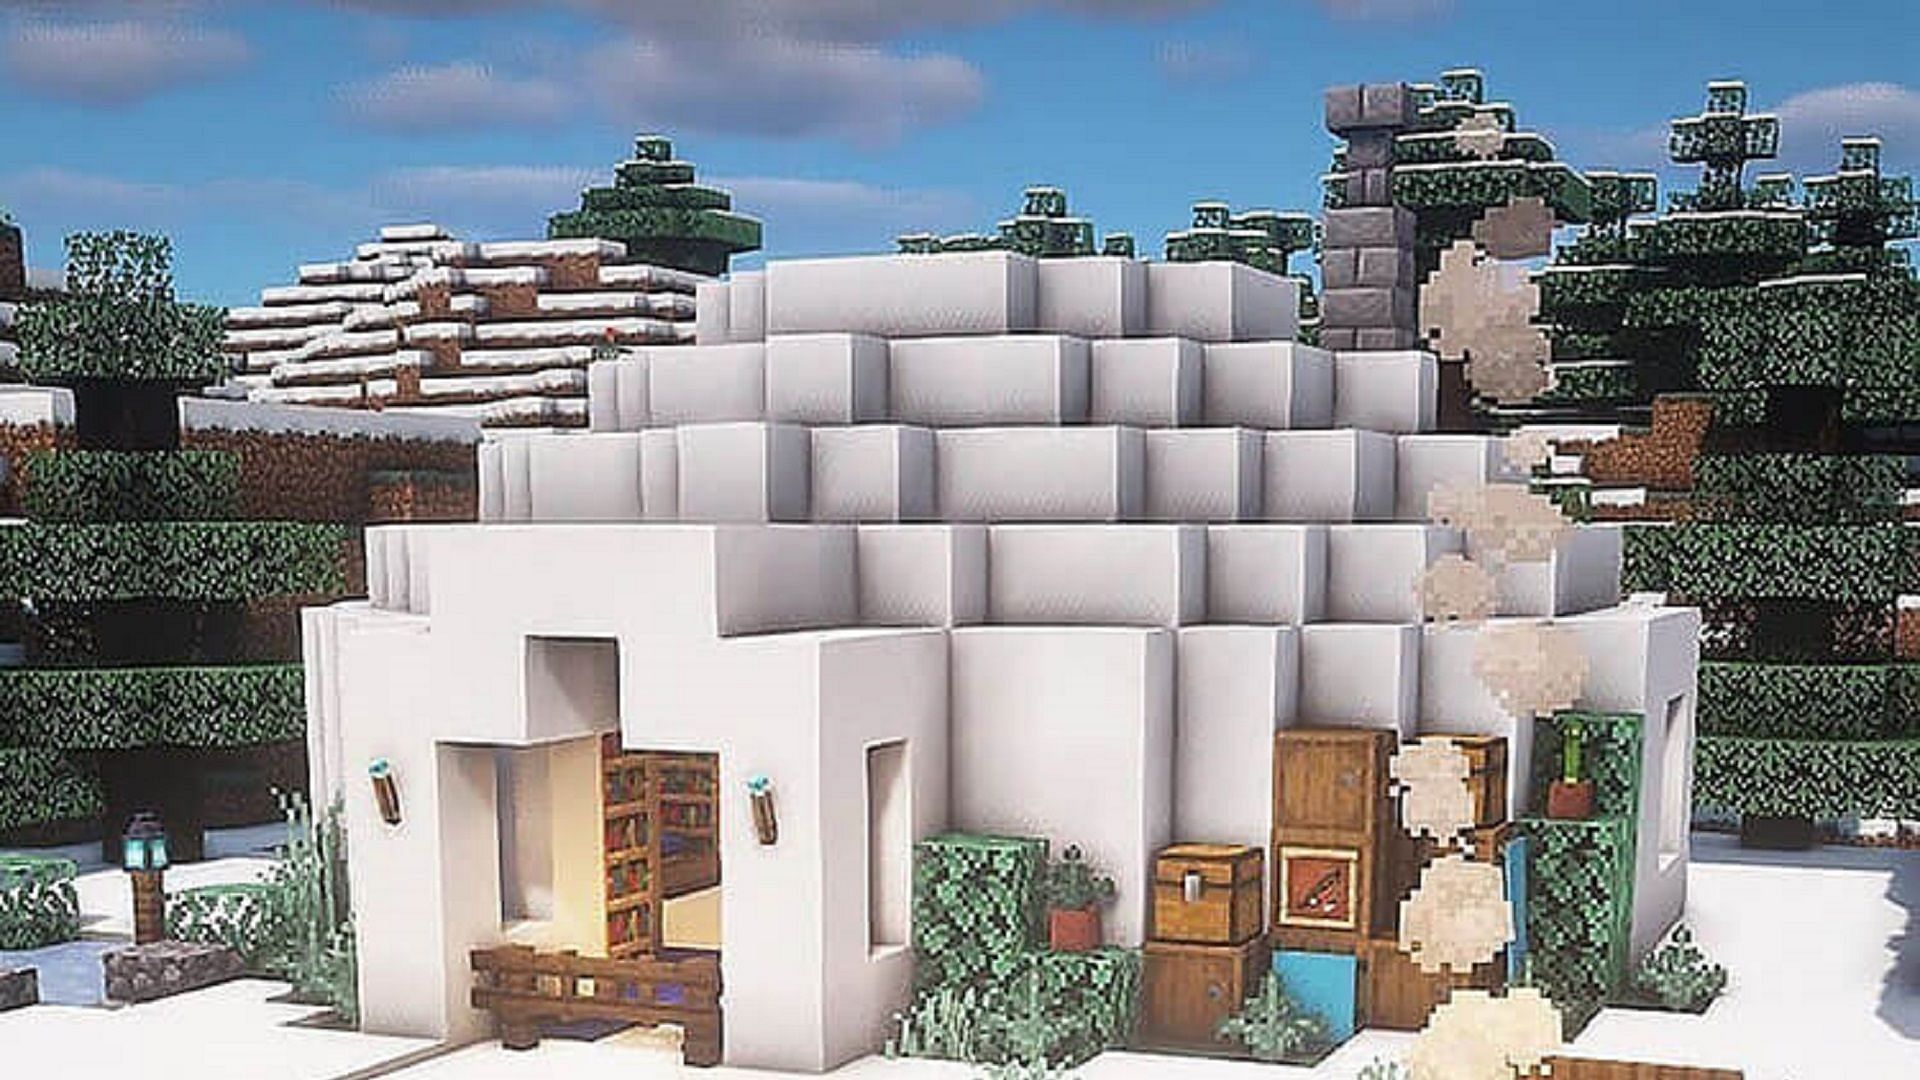 If you find yourself in a snowy Minecraft biome, you may just want to make a base in an igloo (Image via @executivetree/Instagram)